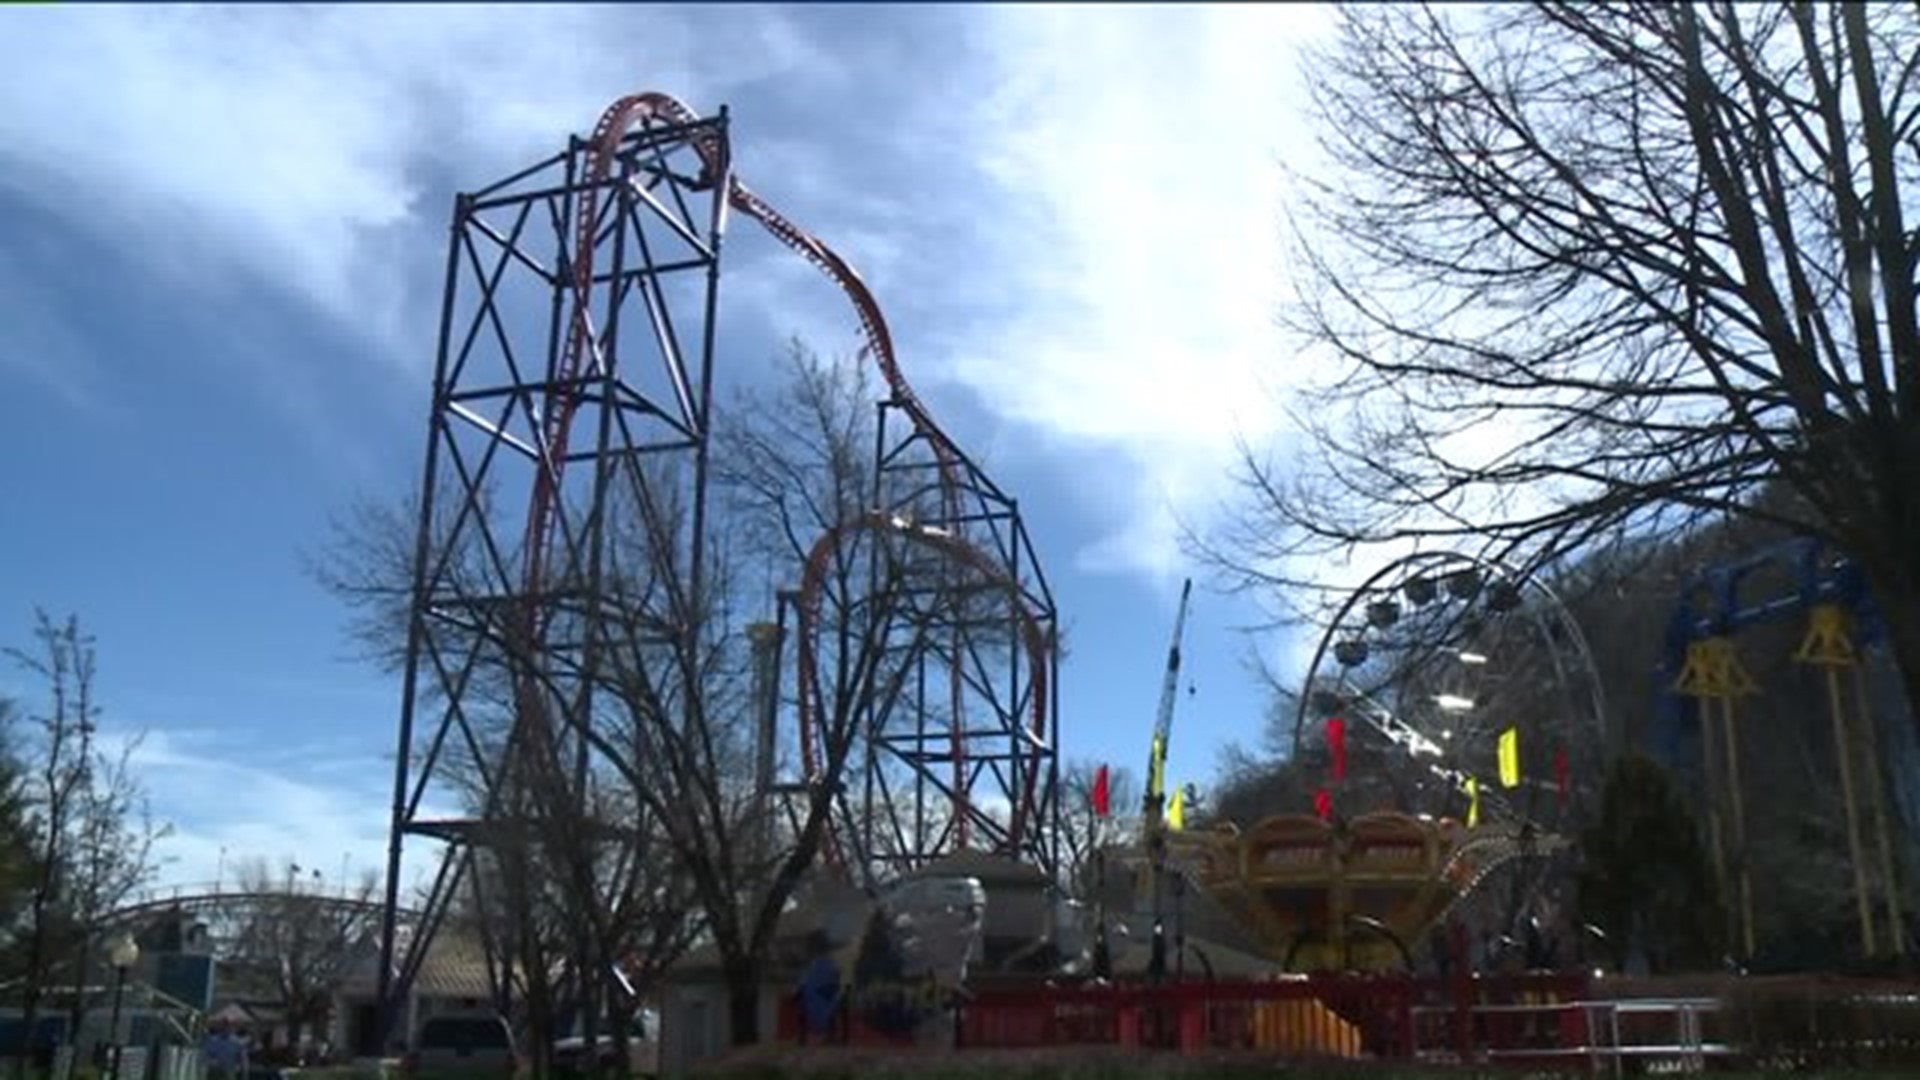 New roller coaster coming to Lake Compounce